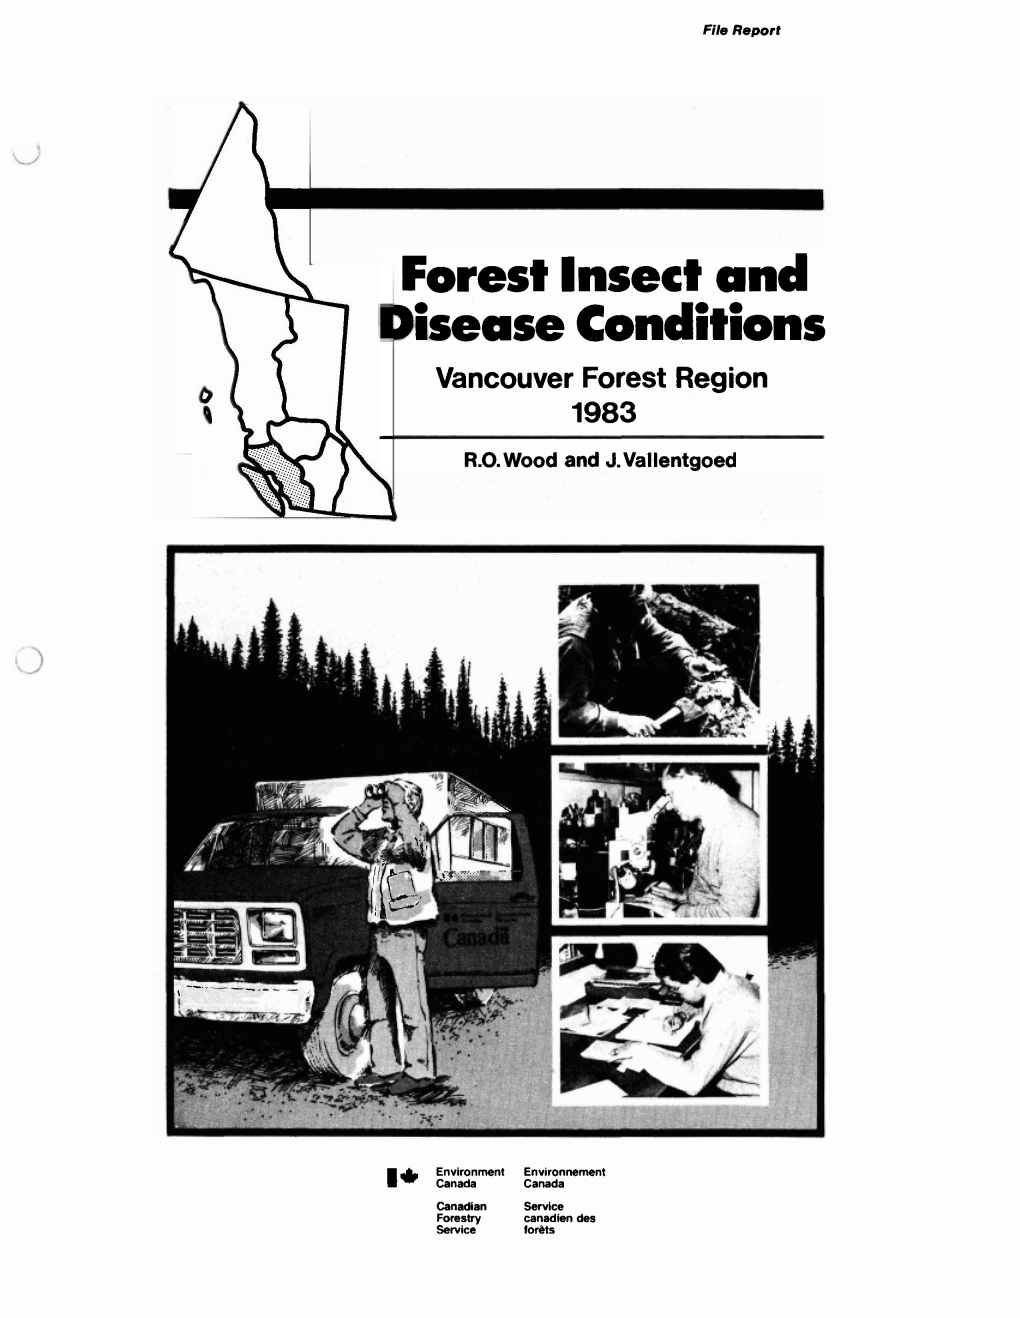 Forest Insect and Disease Conditions Vancouver Forest Region 1983